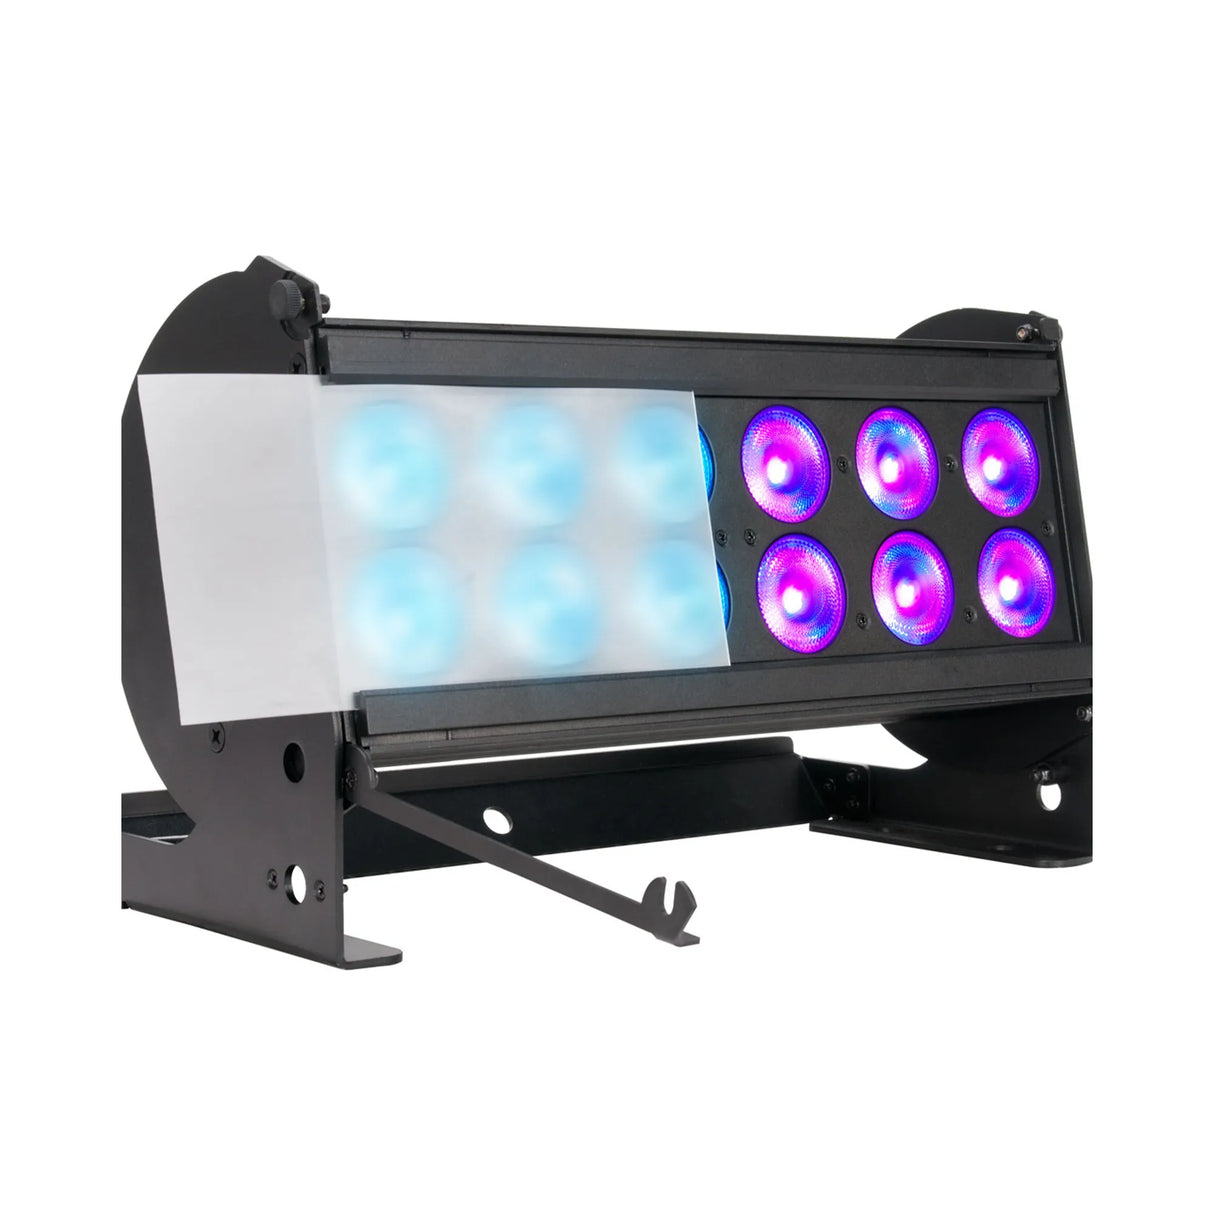 Elation Seven Batten 14 Wash Luminaire with 7-in-1 RGBAW/Lime/UV LEDs